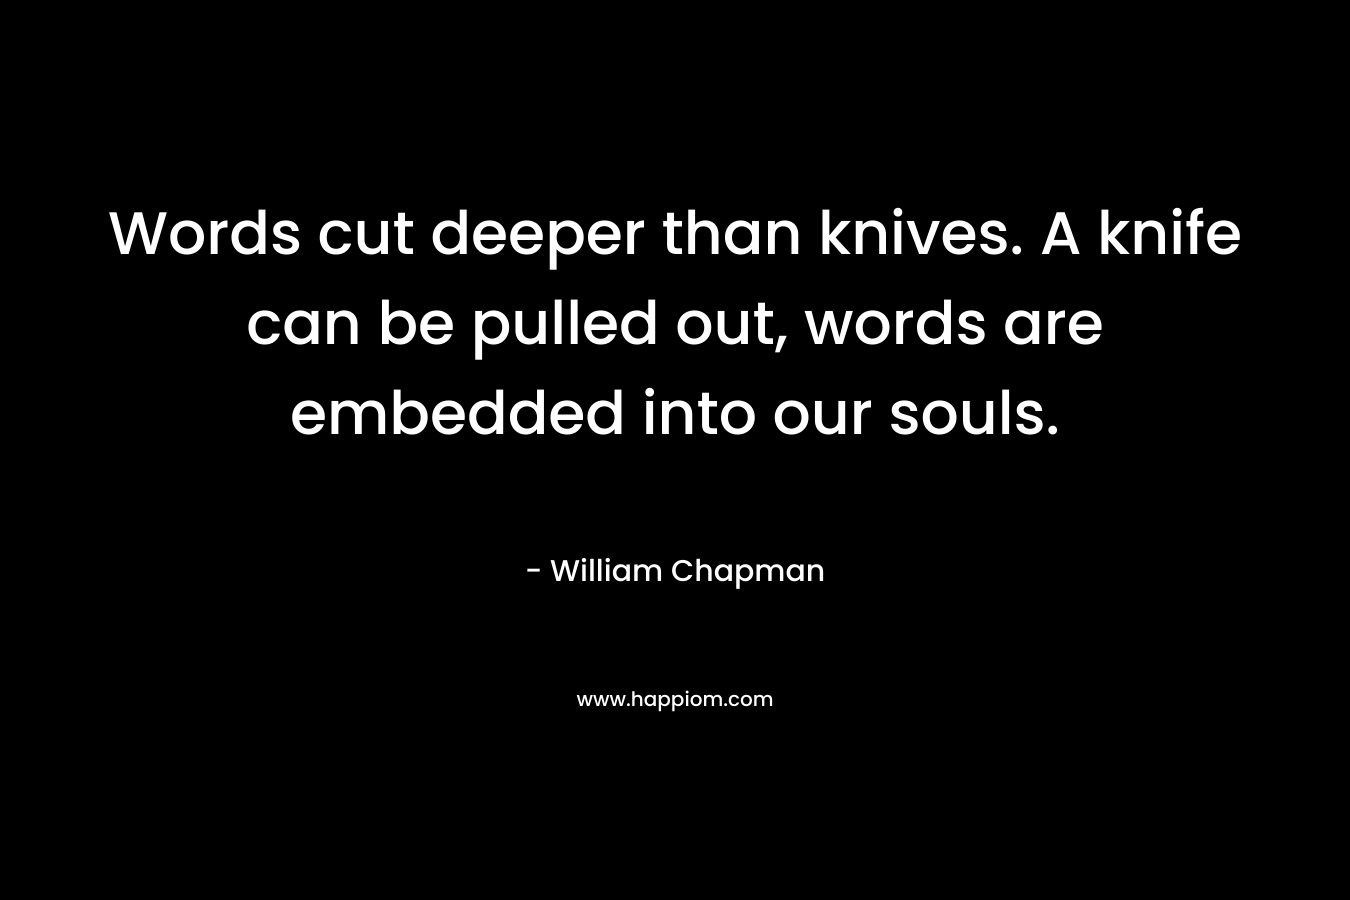 Words cut deeper than knives. A knife can be pulled out, words are embedded into our souls. – William Chapman